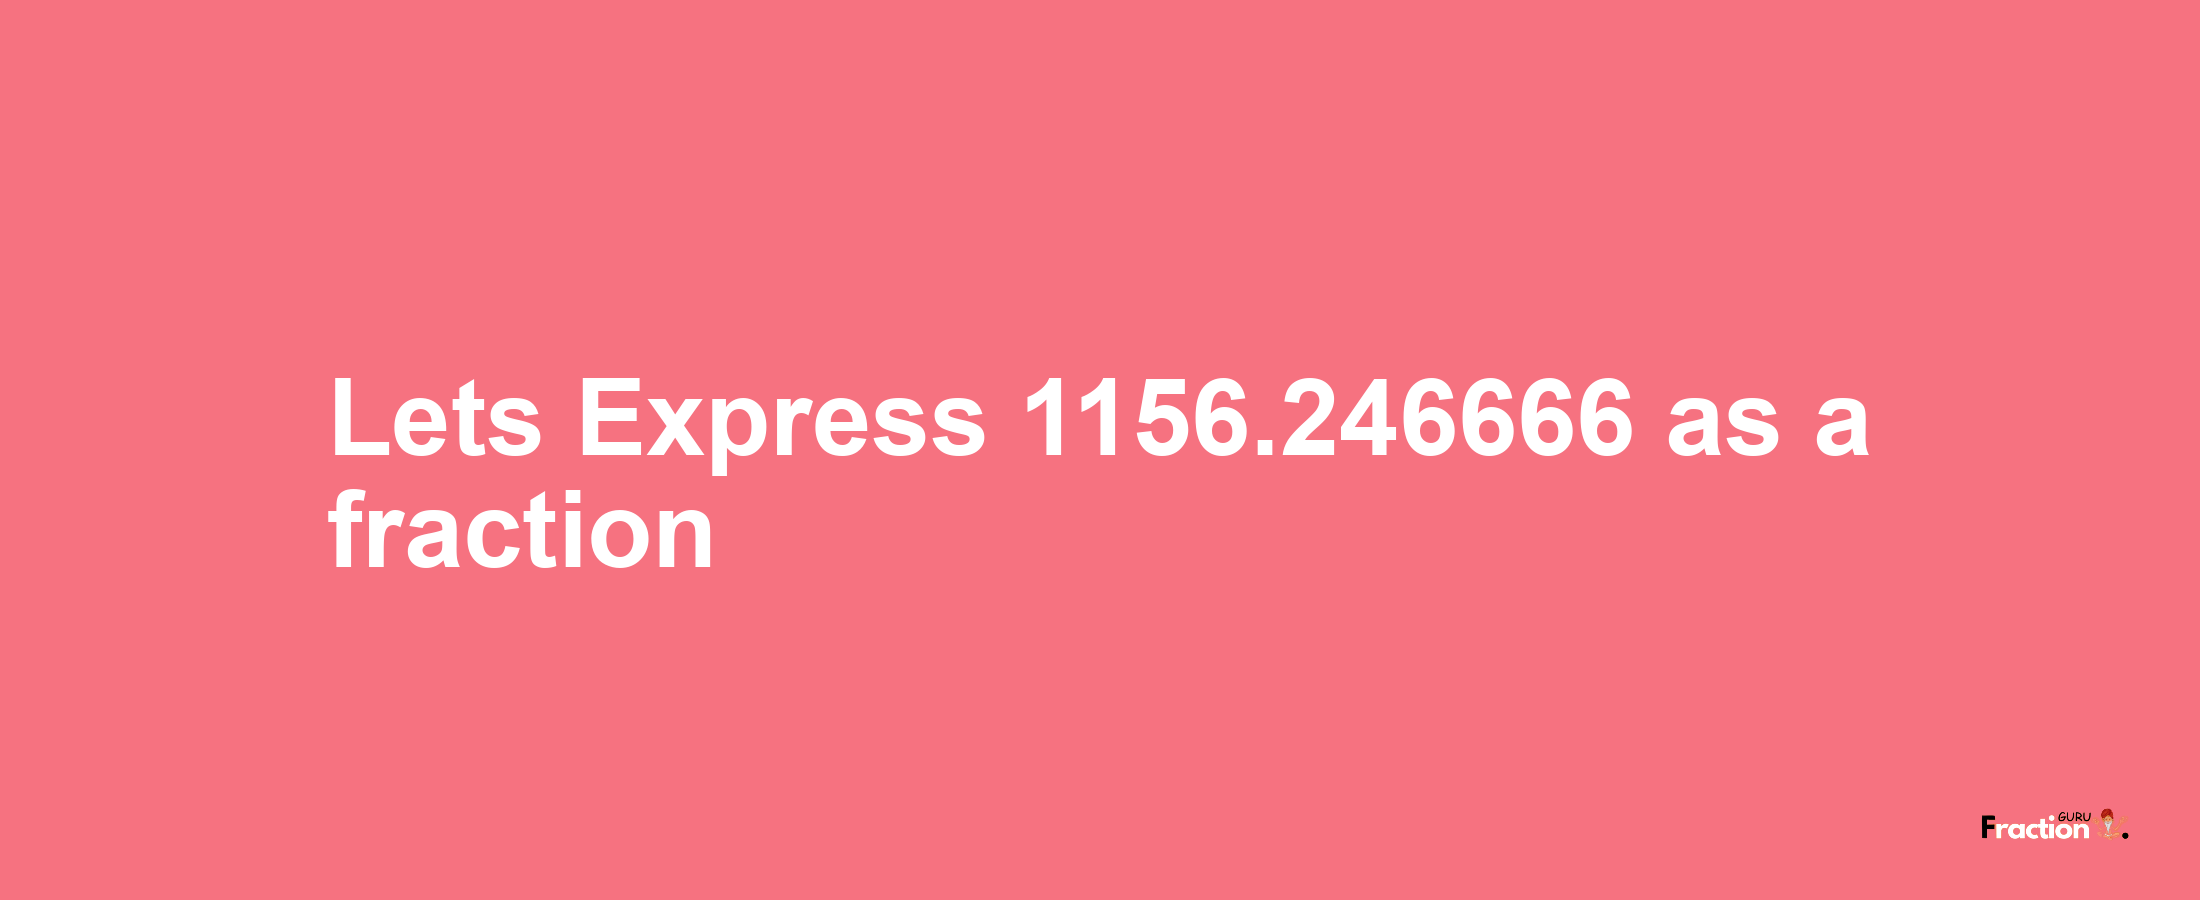 Lets Express 1156.246666 as afraction